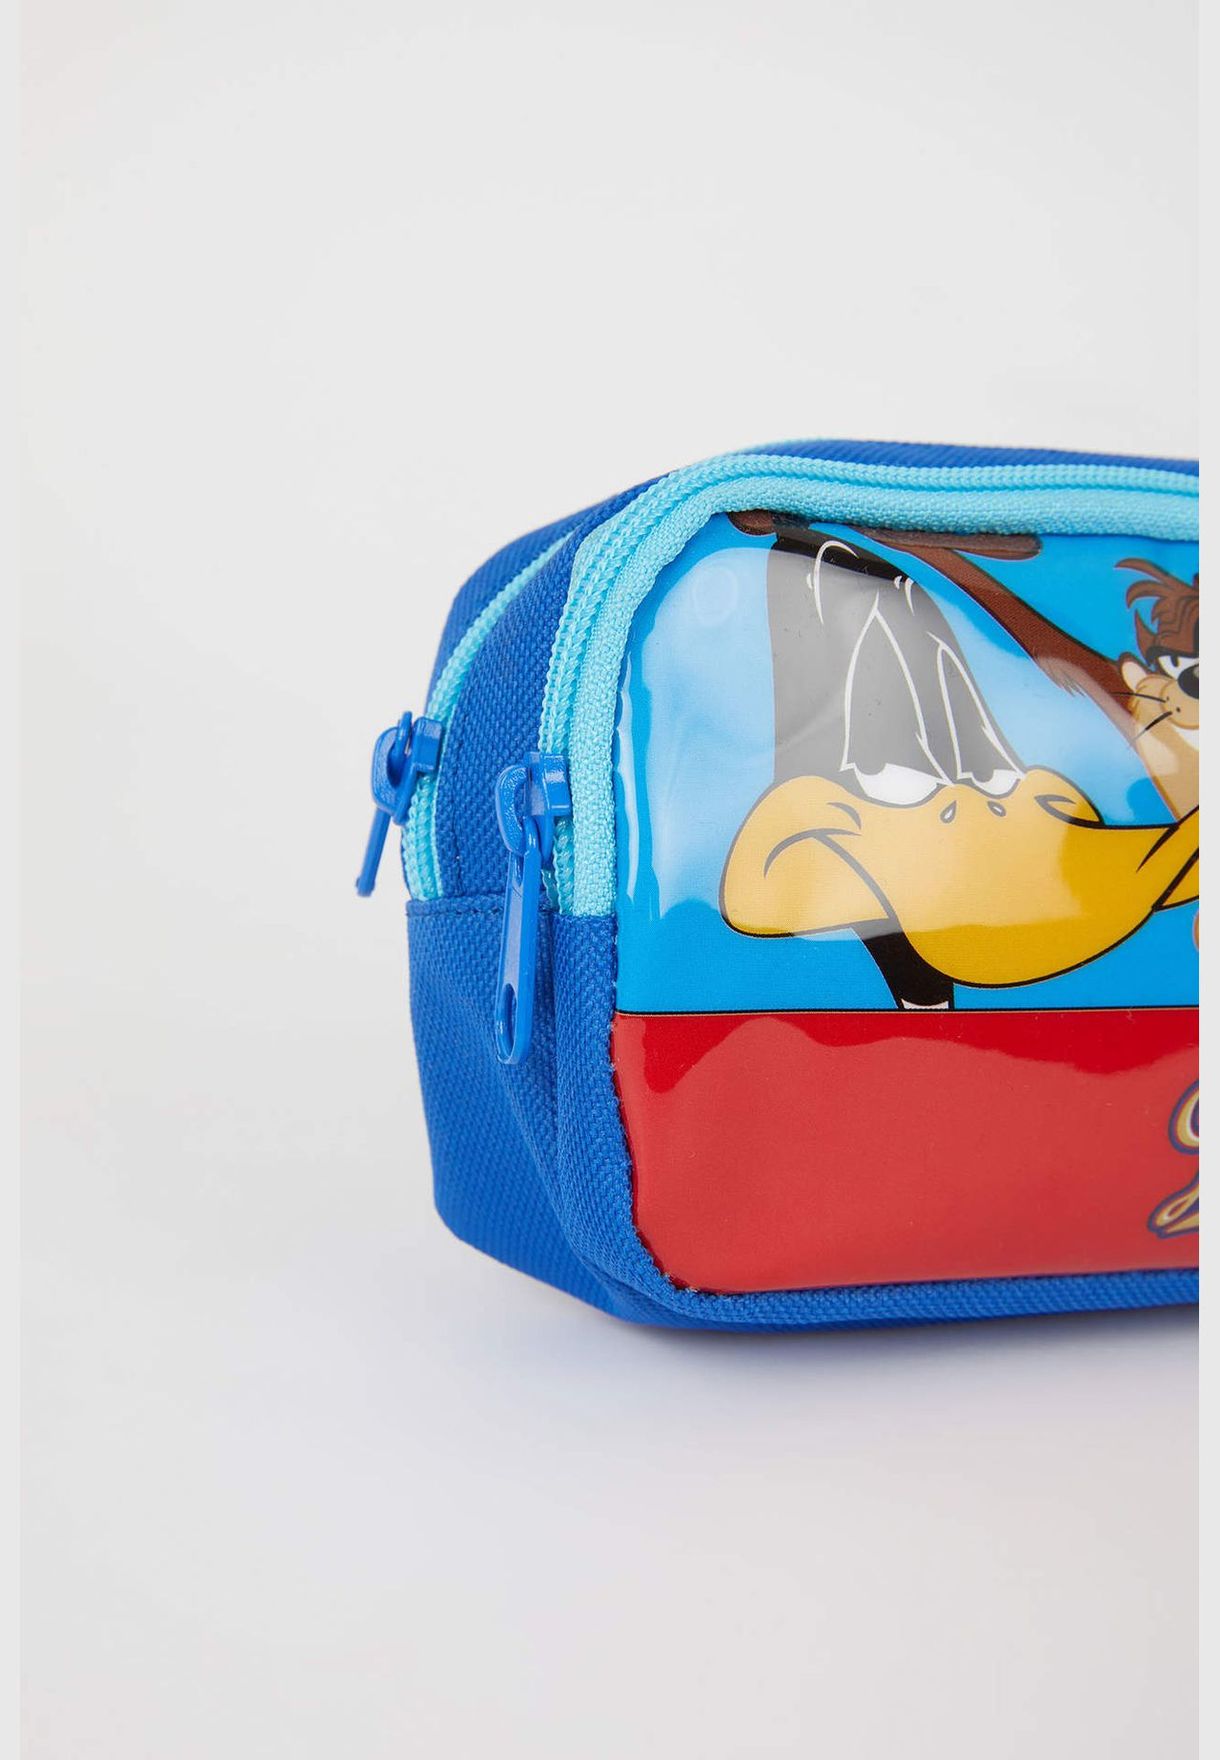 Boy Looney Tunes Licenced BackPack